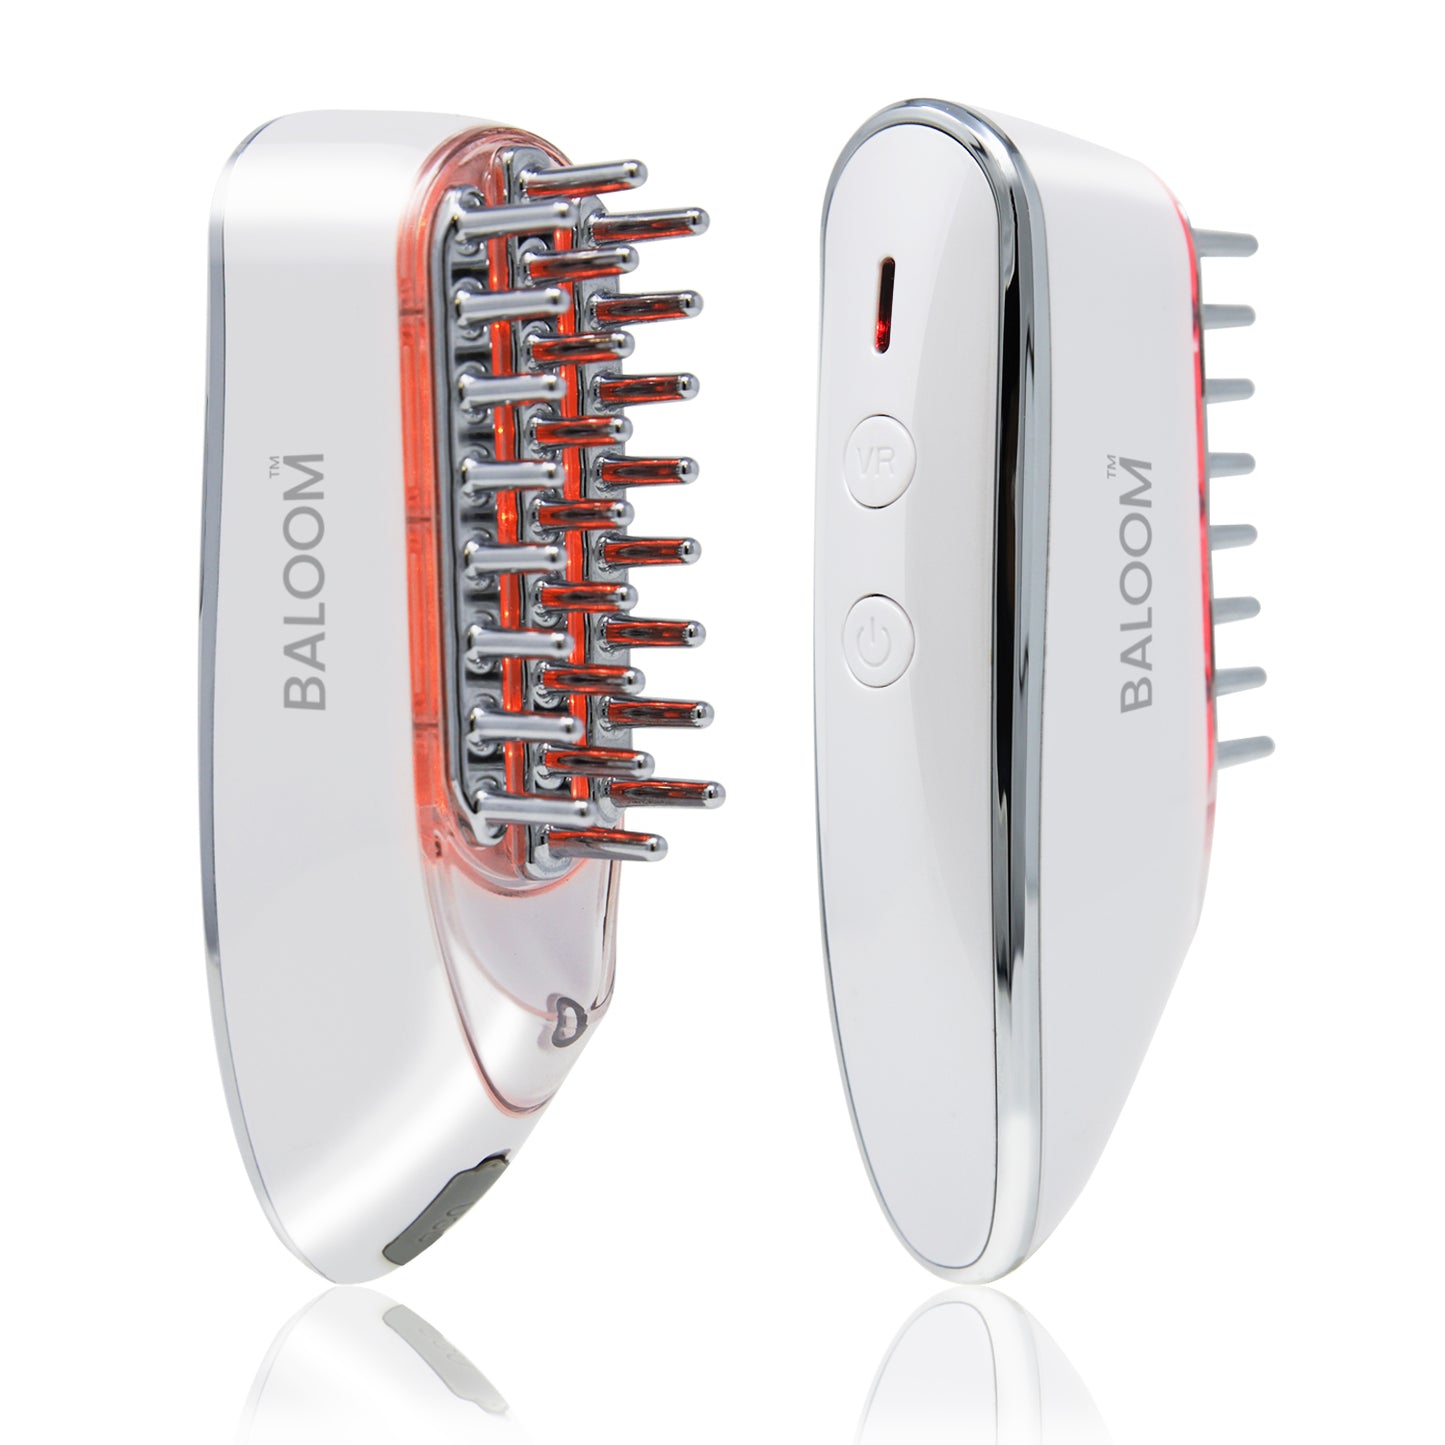 Baloom Scalp Massager provides 4 therapies, microcurrent, red light, vibration, and thermotherapy.